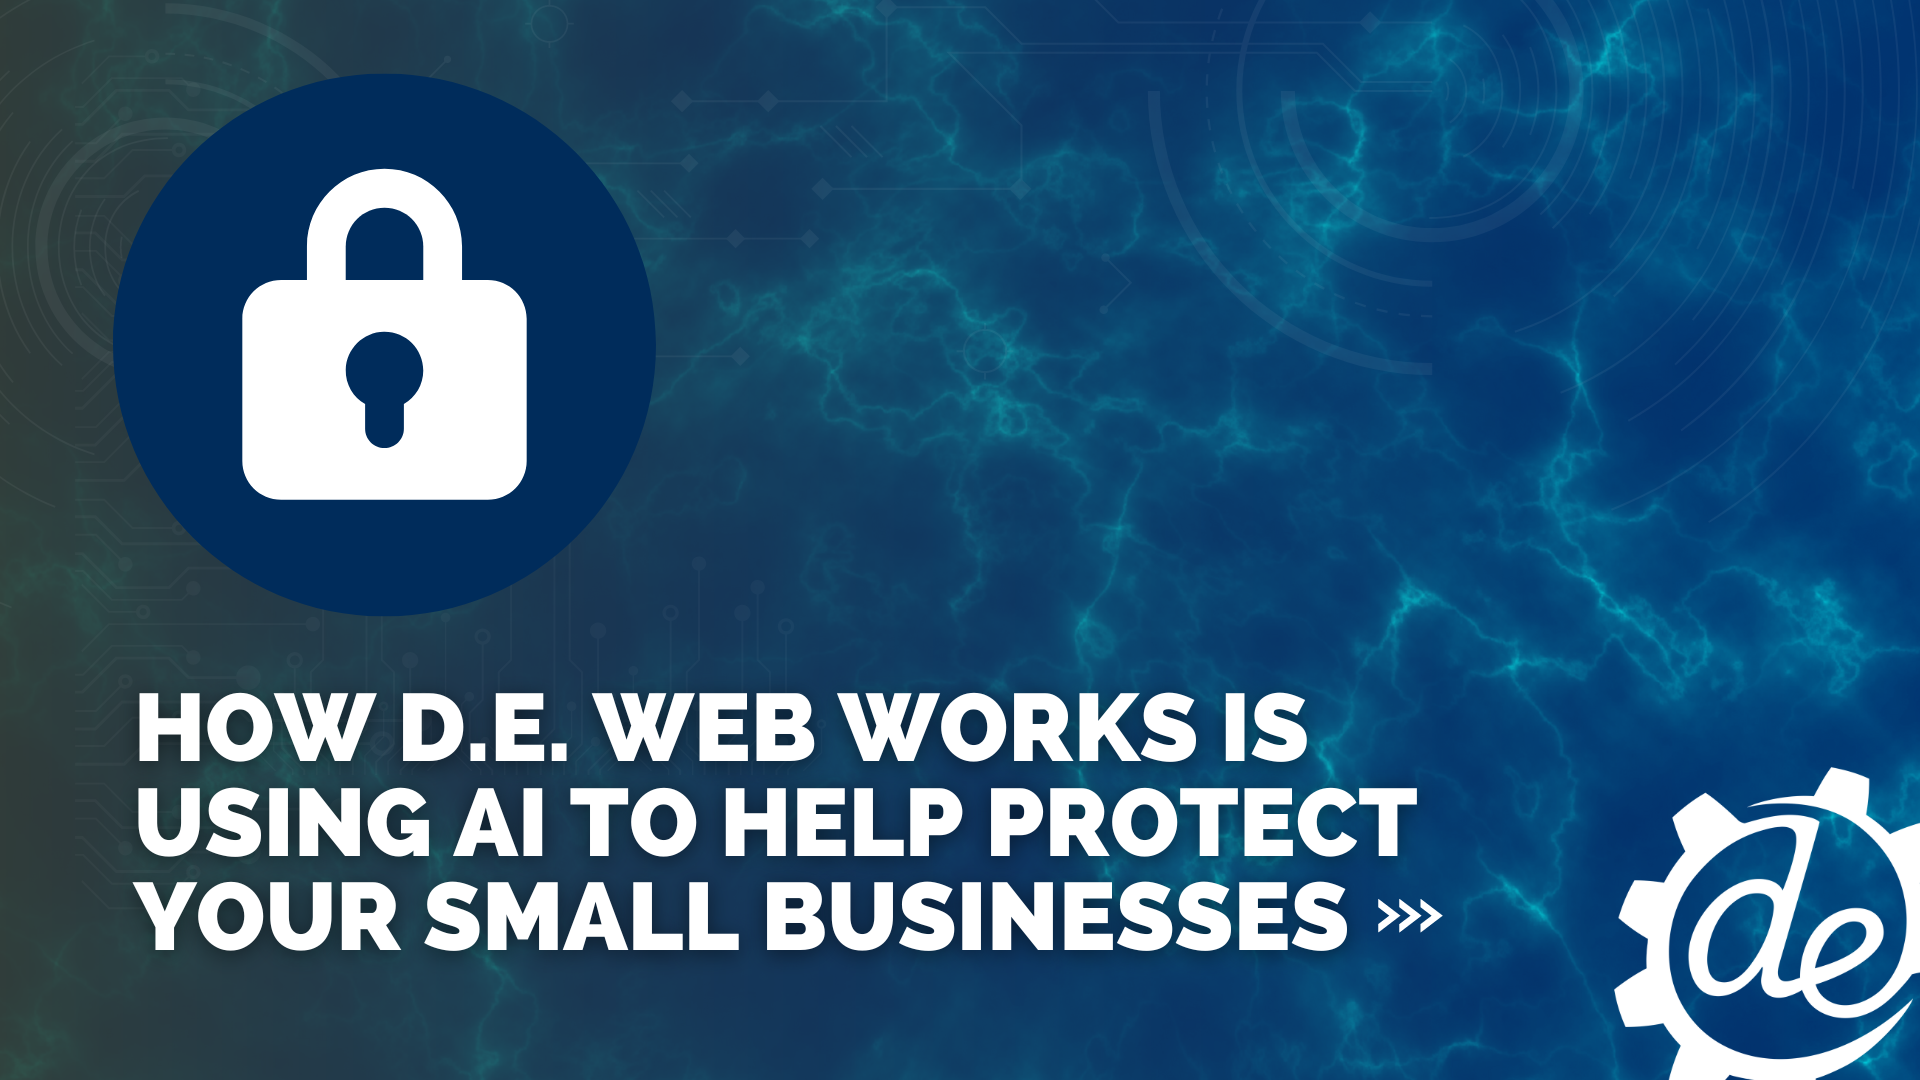 How D.E. Web Works Is Using AI To Help Protect Your Small Businesses